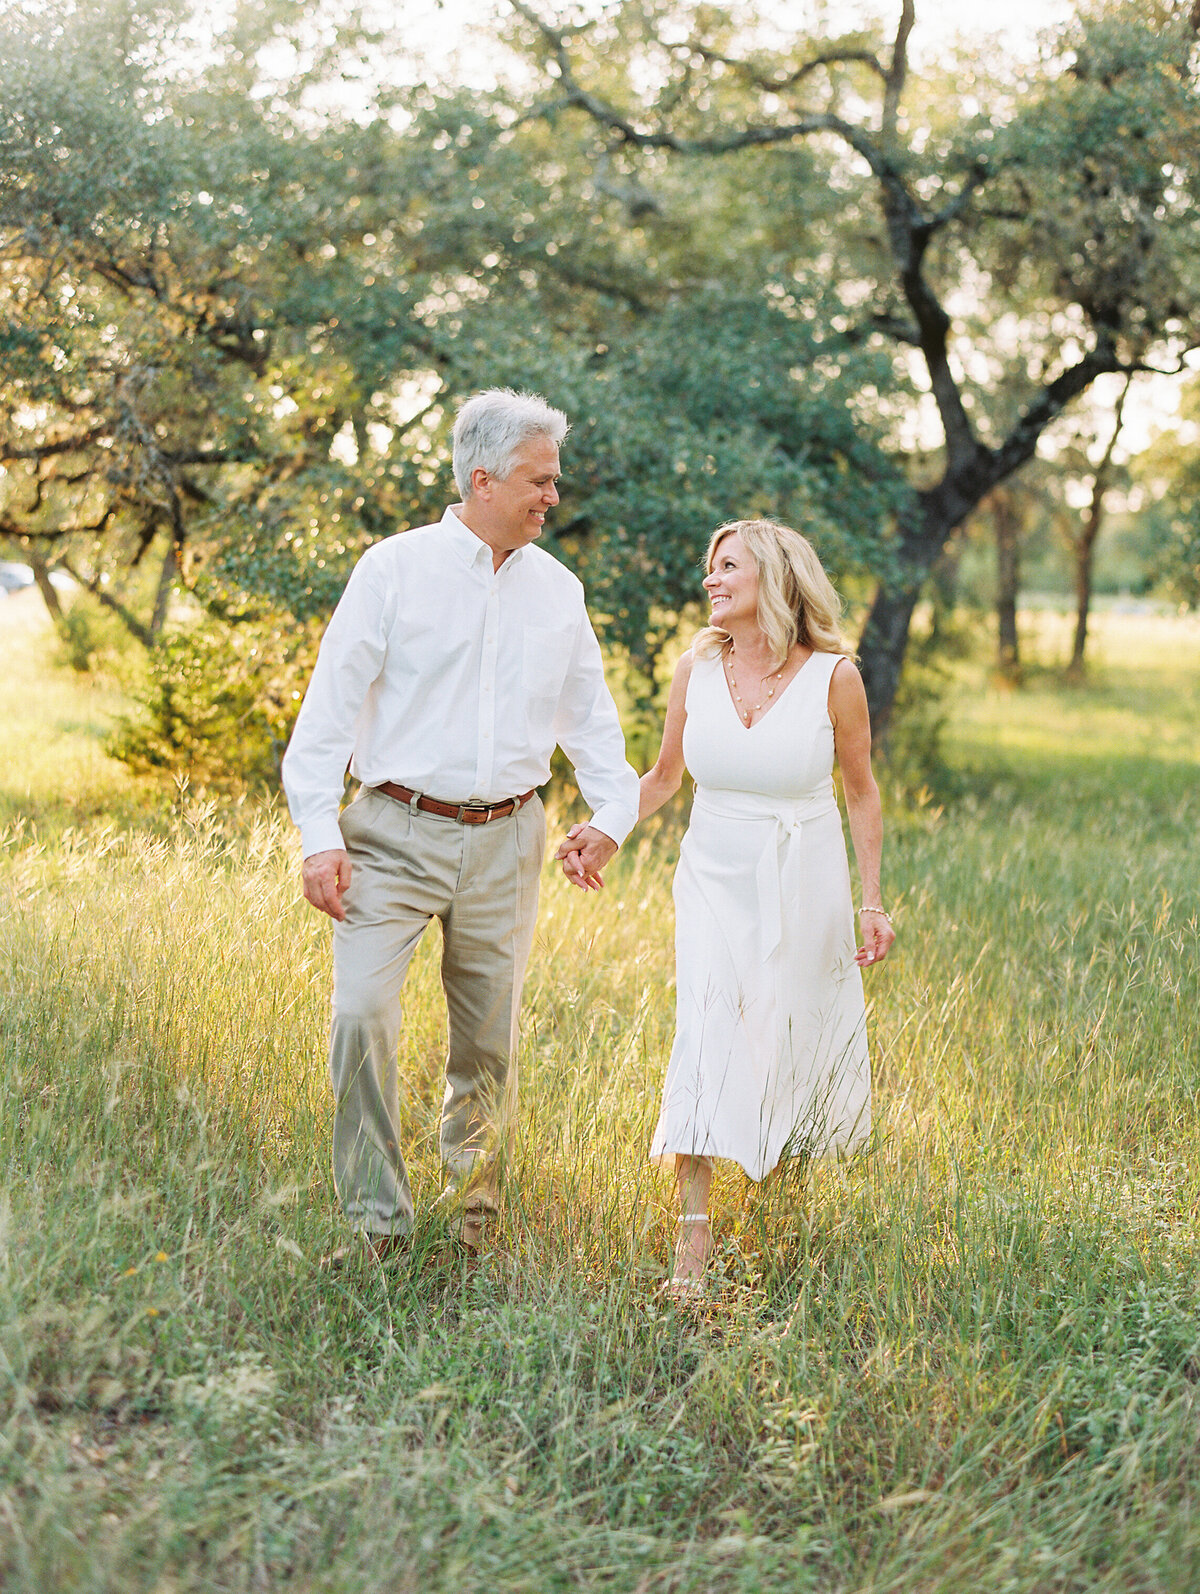 Older couple in white clothes holding hands and smiling at each other while walking through a grassy field